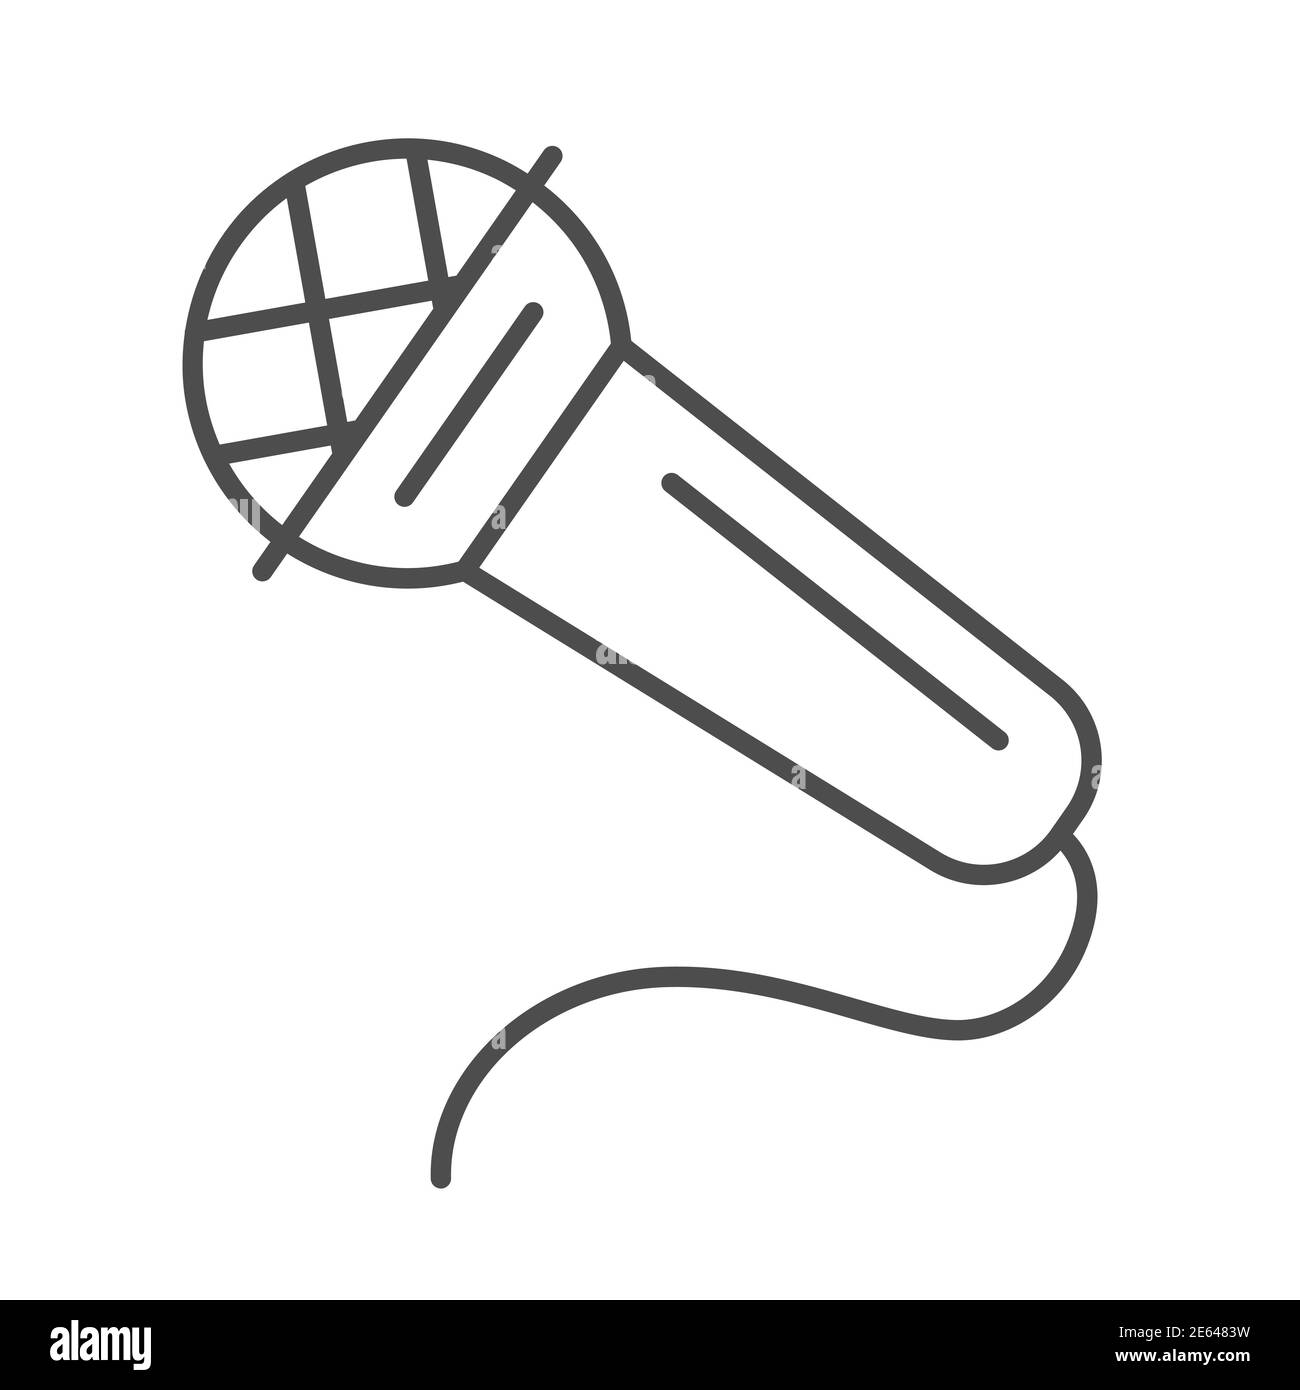 Microphone vintage monochrome icon Cut Out Stock Images & Pictures